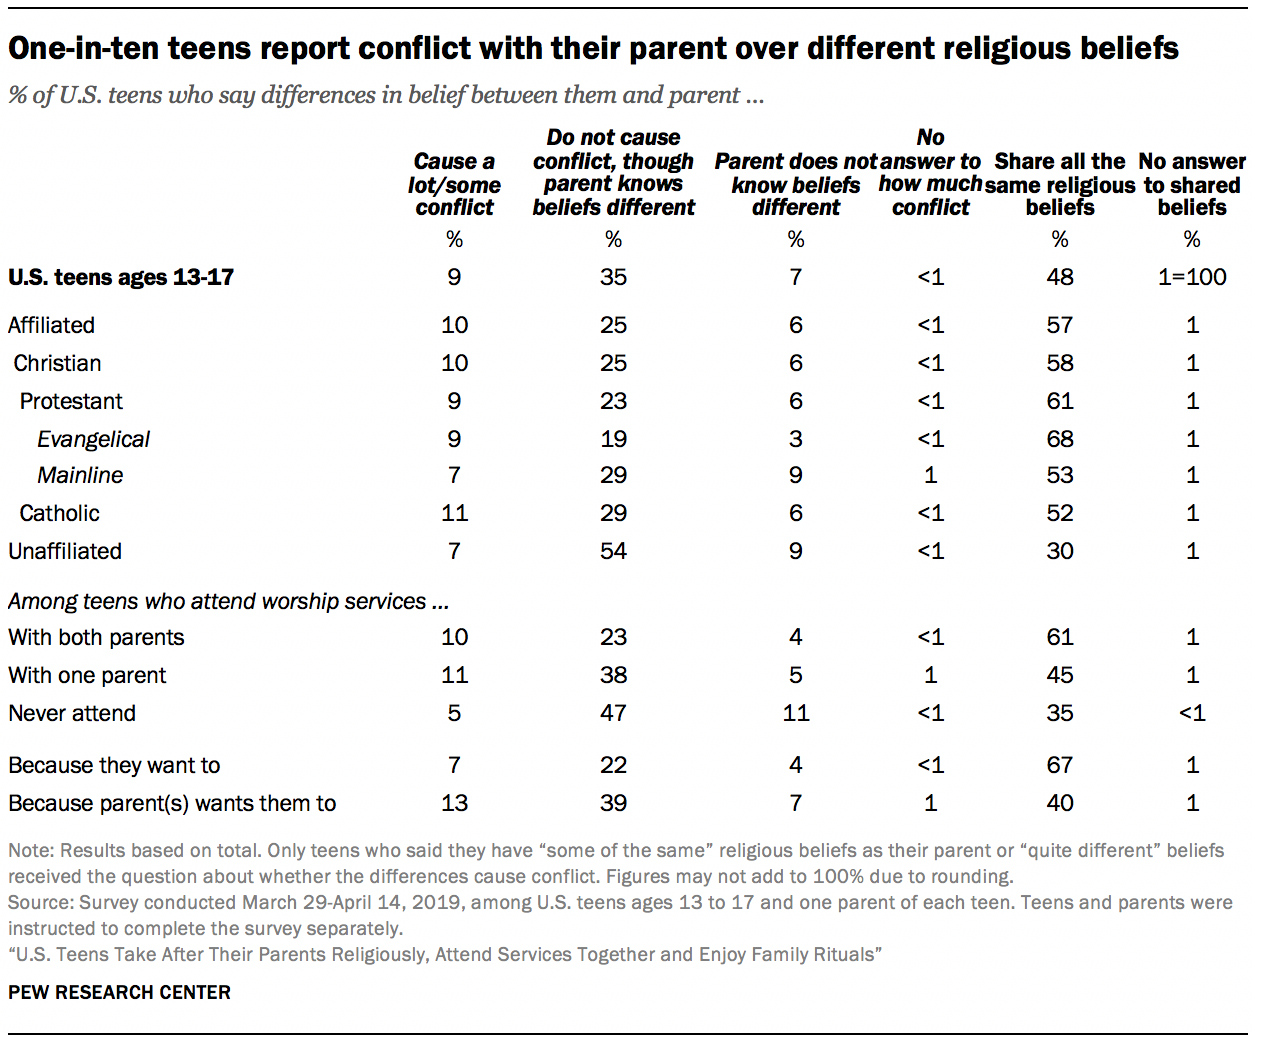 One-in-ten teens report conflict with their parent over different religious beliefs